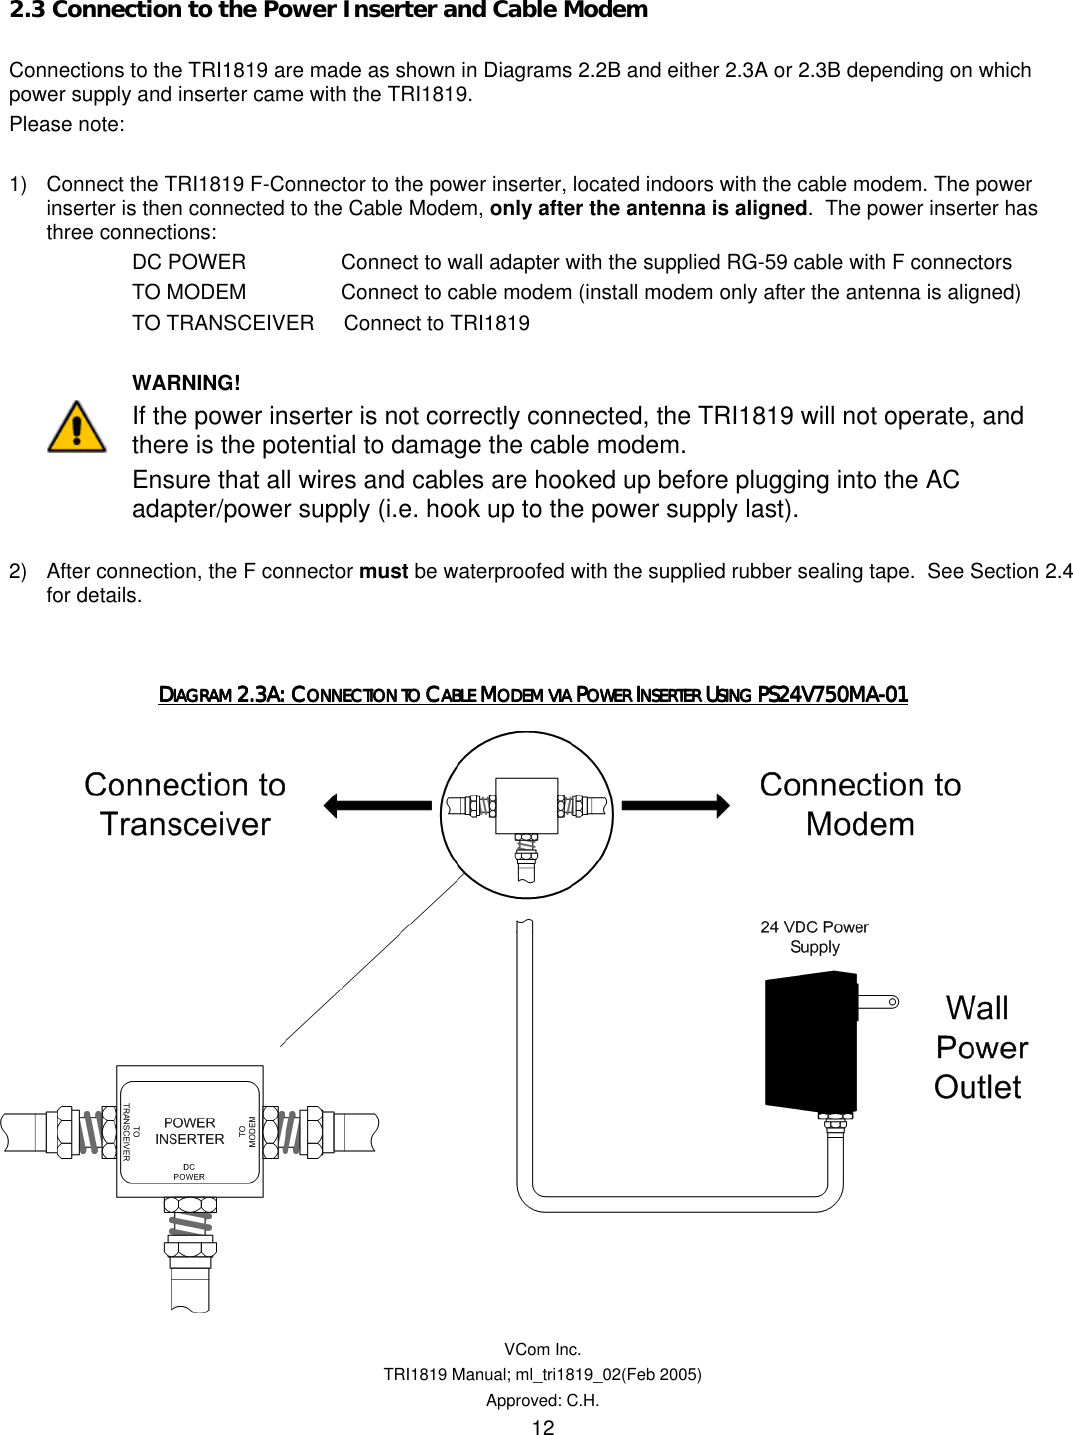   VCom Inc. TRI1819 Manual; ml_tri1819_02(Feb 2005) Approved: C.H.  12 2.3 Connection to the Power Inserter and Cable Modem  Connections to the TRI1819 are made as shown in Diagrams 2.2B and either 2.3A or 2.3B depending on which power supply and inserter came with the TRI1819.   Please note:  1)  Connect the TRI1819 F-Connector to the power inserter, located indoors with the cable modem. The power inserter is then connected to the Cable Modem, only after the antenna is aligned.  The power inserter has three connections: DC POWER       Connect to wall adapter with the supplied RG-59 cable with F connectors TO MODEM       Connect to cable modem (install modem only after the antenna is aligned) TO TRANSCEIVER     Connect to TRI1819         WARNING! If the power inserter is not correctly connected, the TRI1819 will not operate, and there is the potential to damage the cable modem.   Ensure that all wires and cables are hooked up before plugging into the AC adapter/power supply (i.e. hook up to the power supply last).  2)  After connection, the F connector must be waterproofed with the supplied rubber sealing tape.  See Section 2.4 for details.     DDDDIAGRAM IAGRAM IAGRAM IAGRAM 2.3A: C2.3A: C2.3A: C2.3A: CONNECTION TO ONNECTION TO ONNECTION TO ONNECTION TO CCCCABLE ABLE ABLE ABLE MMMMODEM VIA ODEM VIA ODEM VIA ODEM VIA PPPPOWER OWER OWER OWER IIIINSERTER NSERTER NSERTER NSERTER UUUUSING SING SING SING PS24V750MAPS24V750MAPS24V750MAPS24V750MA----01010101        